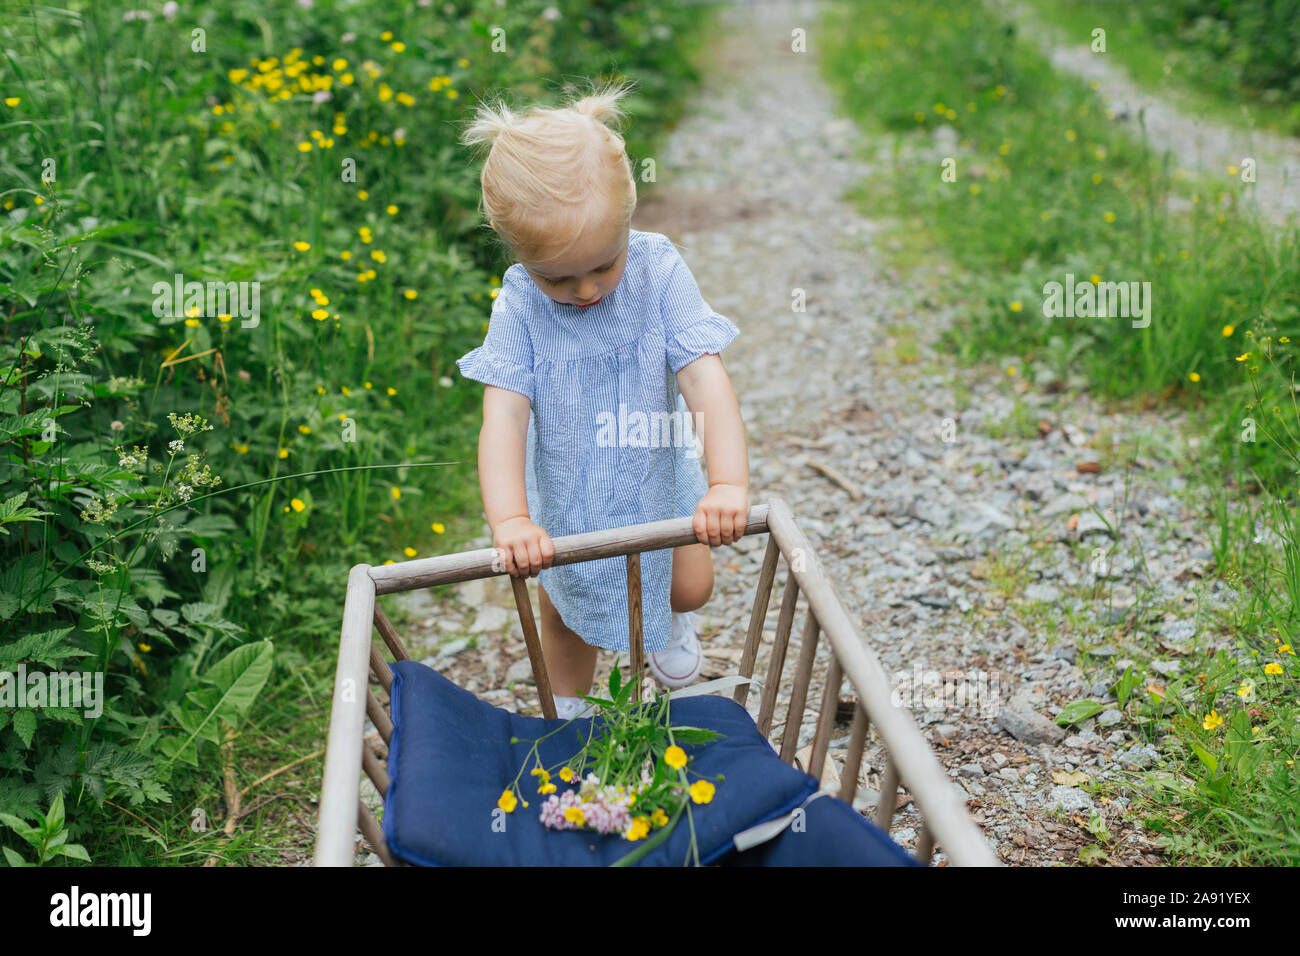 Girl with wooden cart Stock Photo